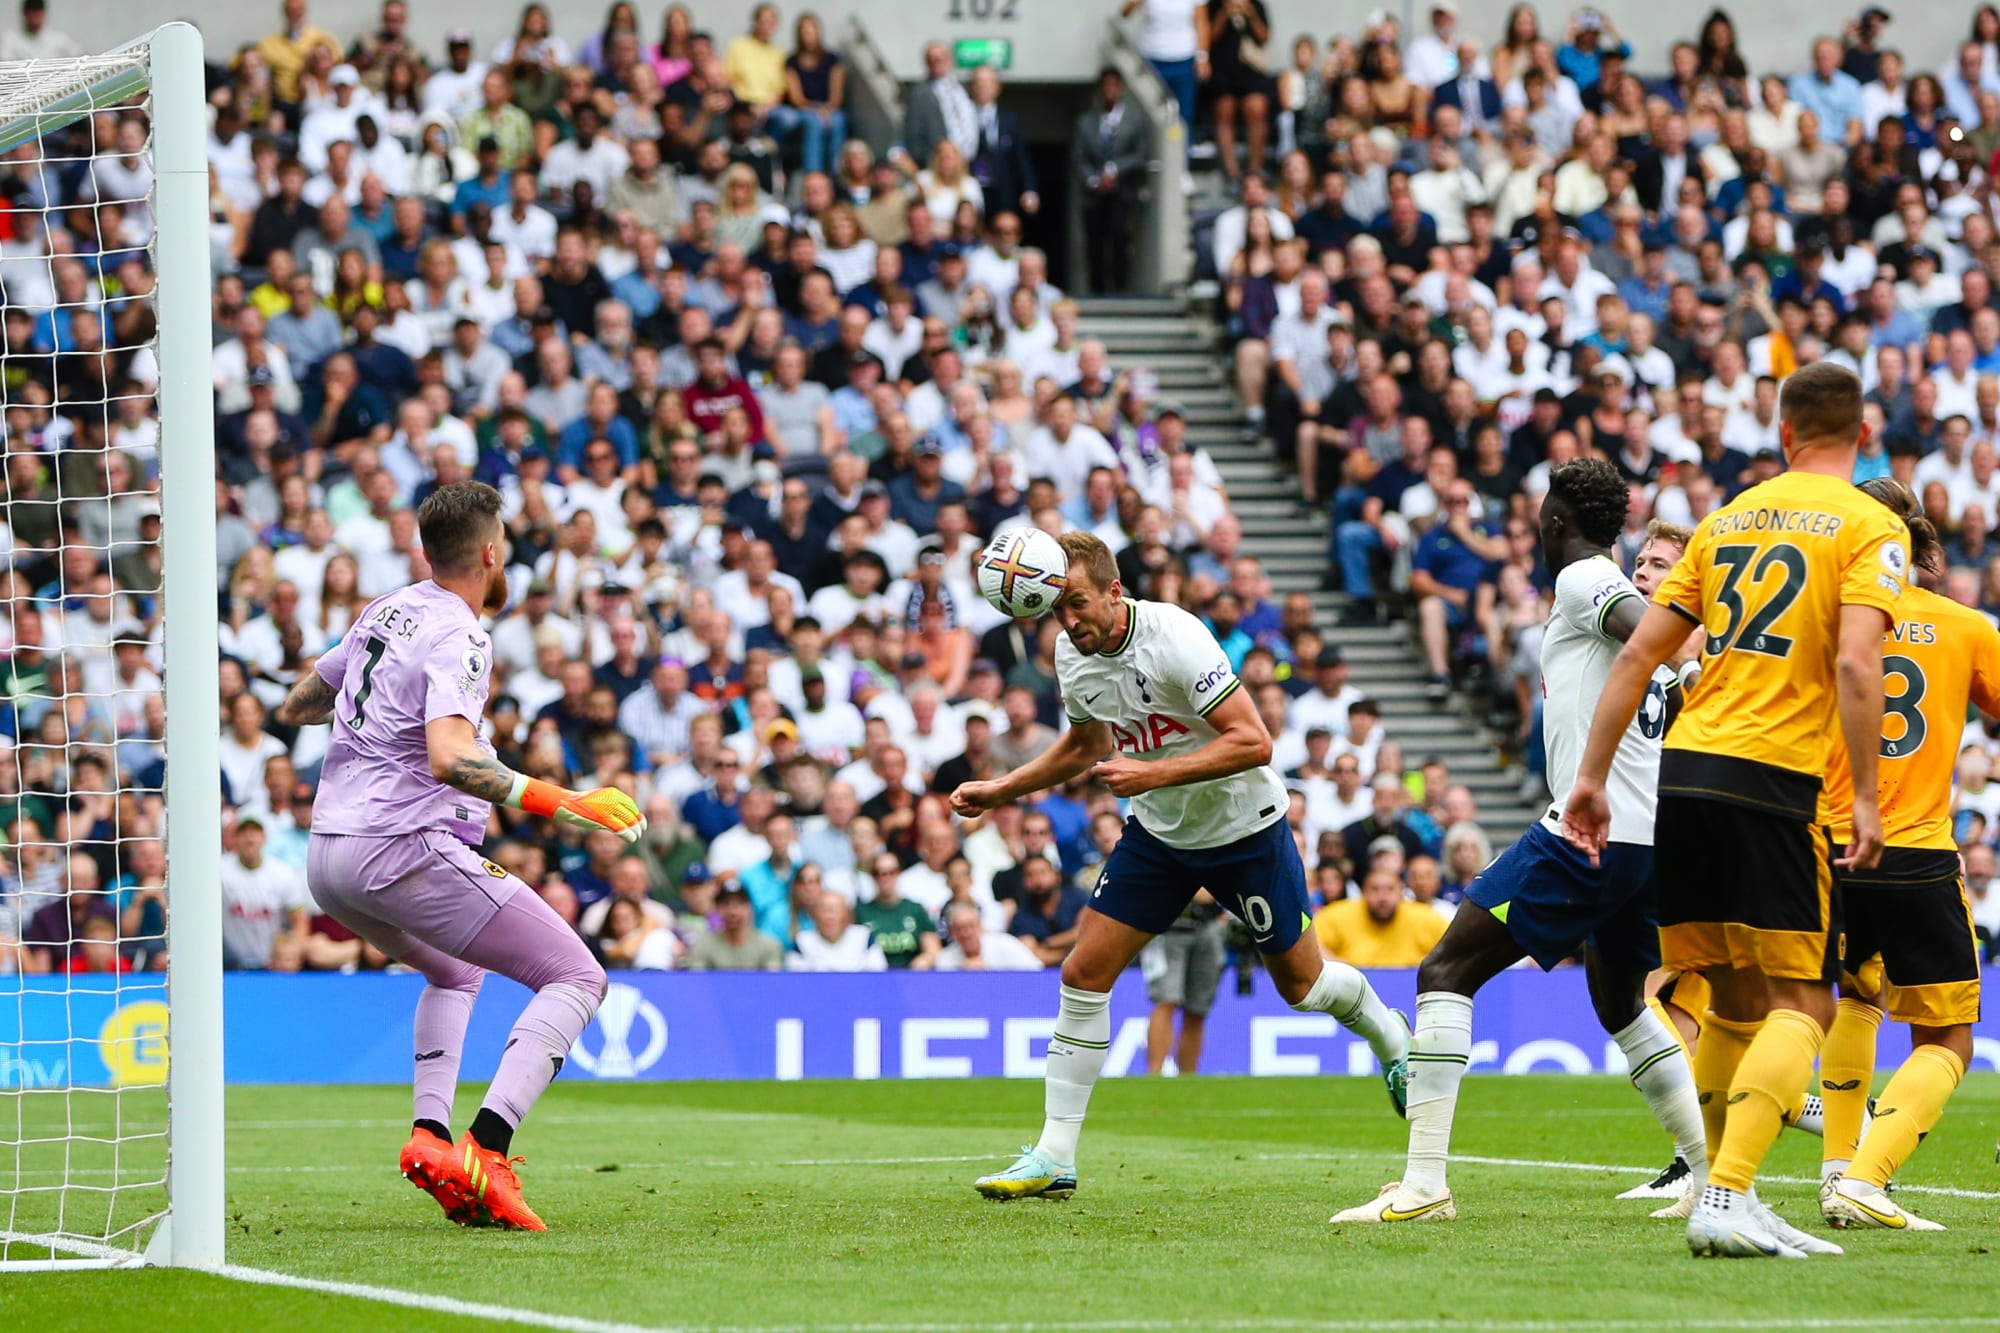 Goal was monumental for Harry Kane and Tottenham Hotspur